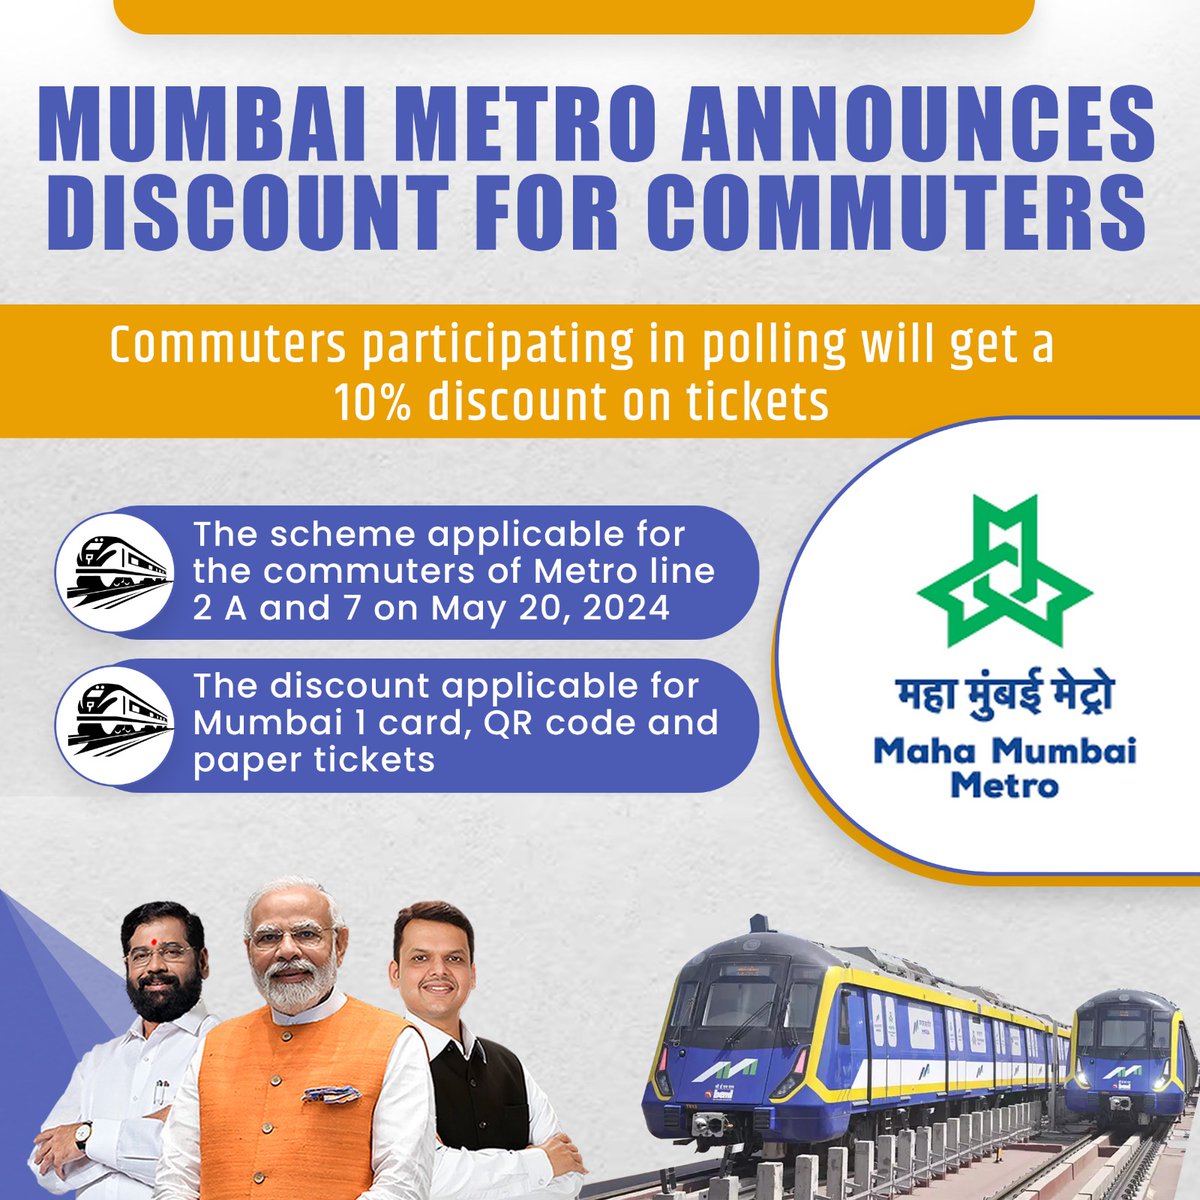 A win-win for commuters and democracy! 10% discount scheme on Mumbai Metro tickets for those participating in polling on May 20, 2024. Let's exercise our right to vote and enjoy discounted travel on Metro line 2A and 7. #VoteAndRide